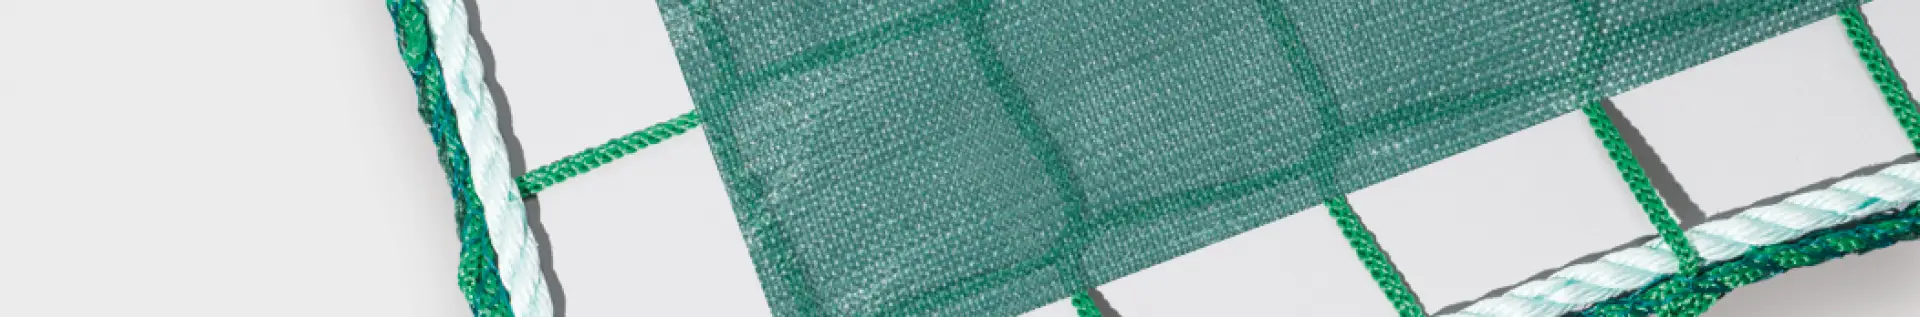 60 mm mesh fall protection net with dense fabric - Cod. AN0413-XS